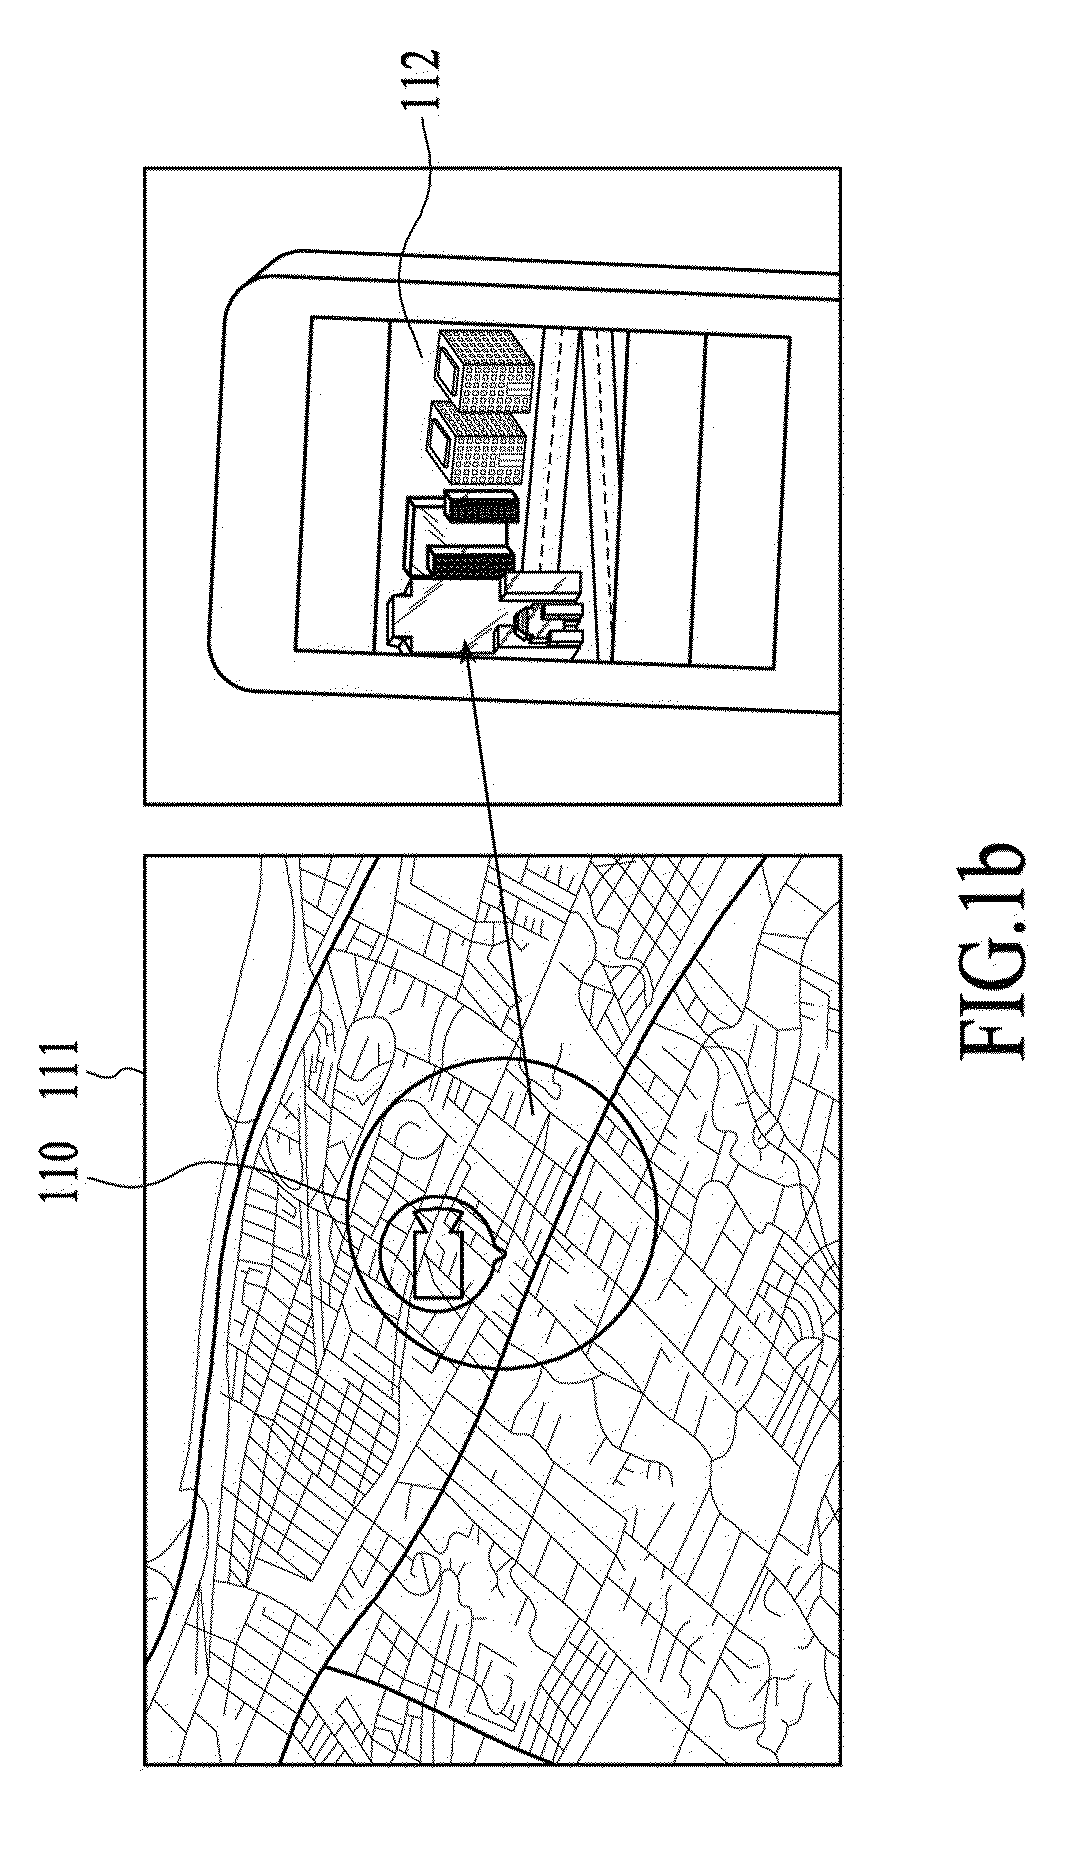 Embedded media markers and systems and methods for generating and using them